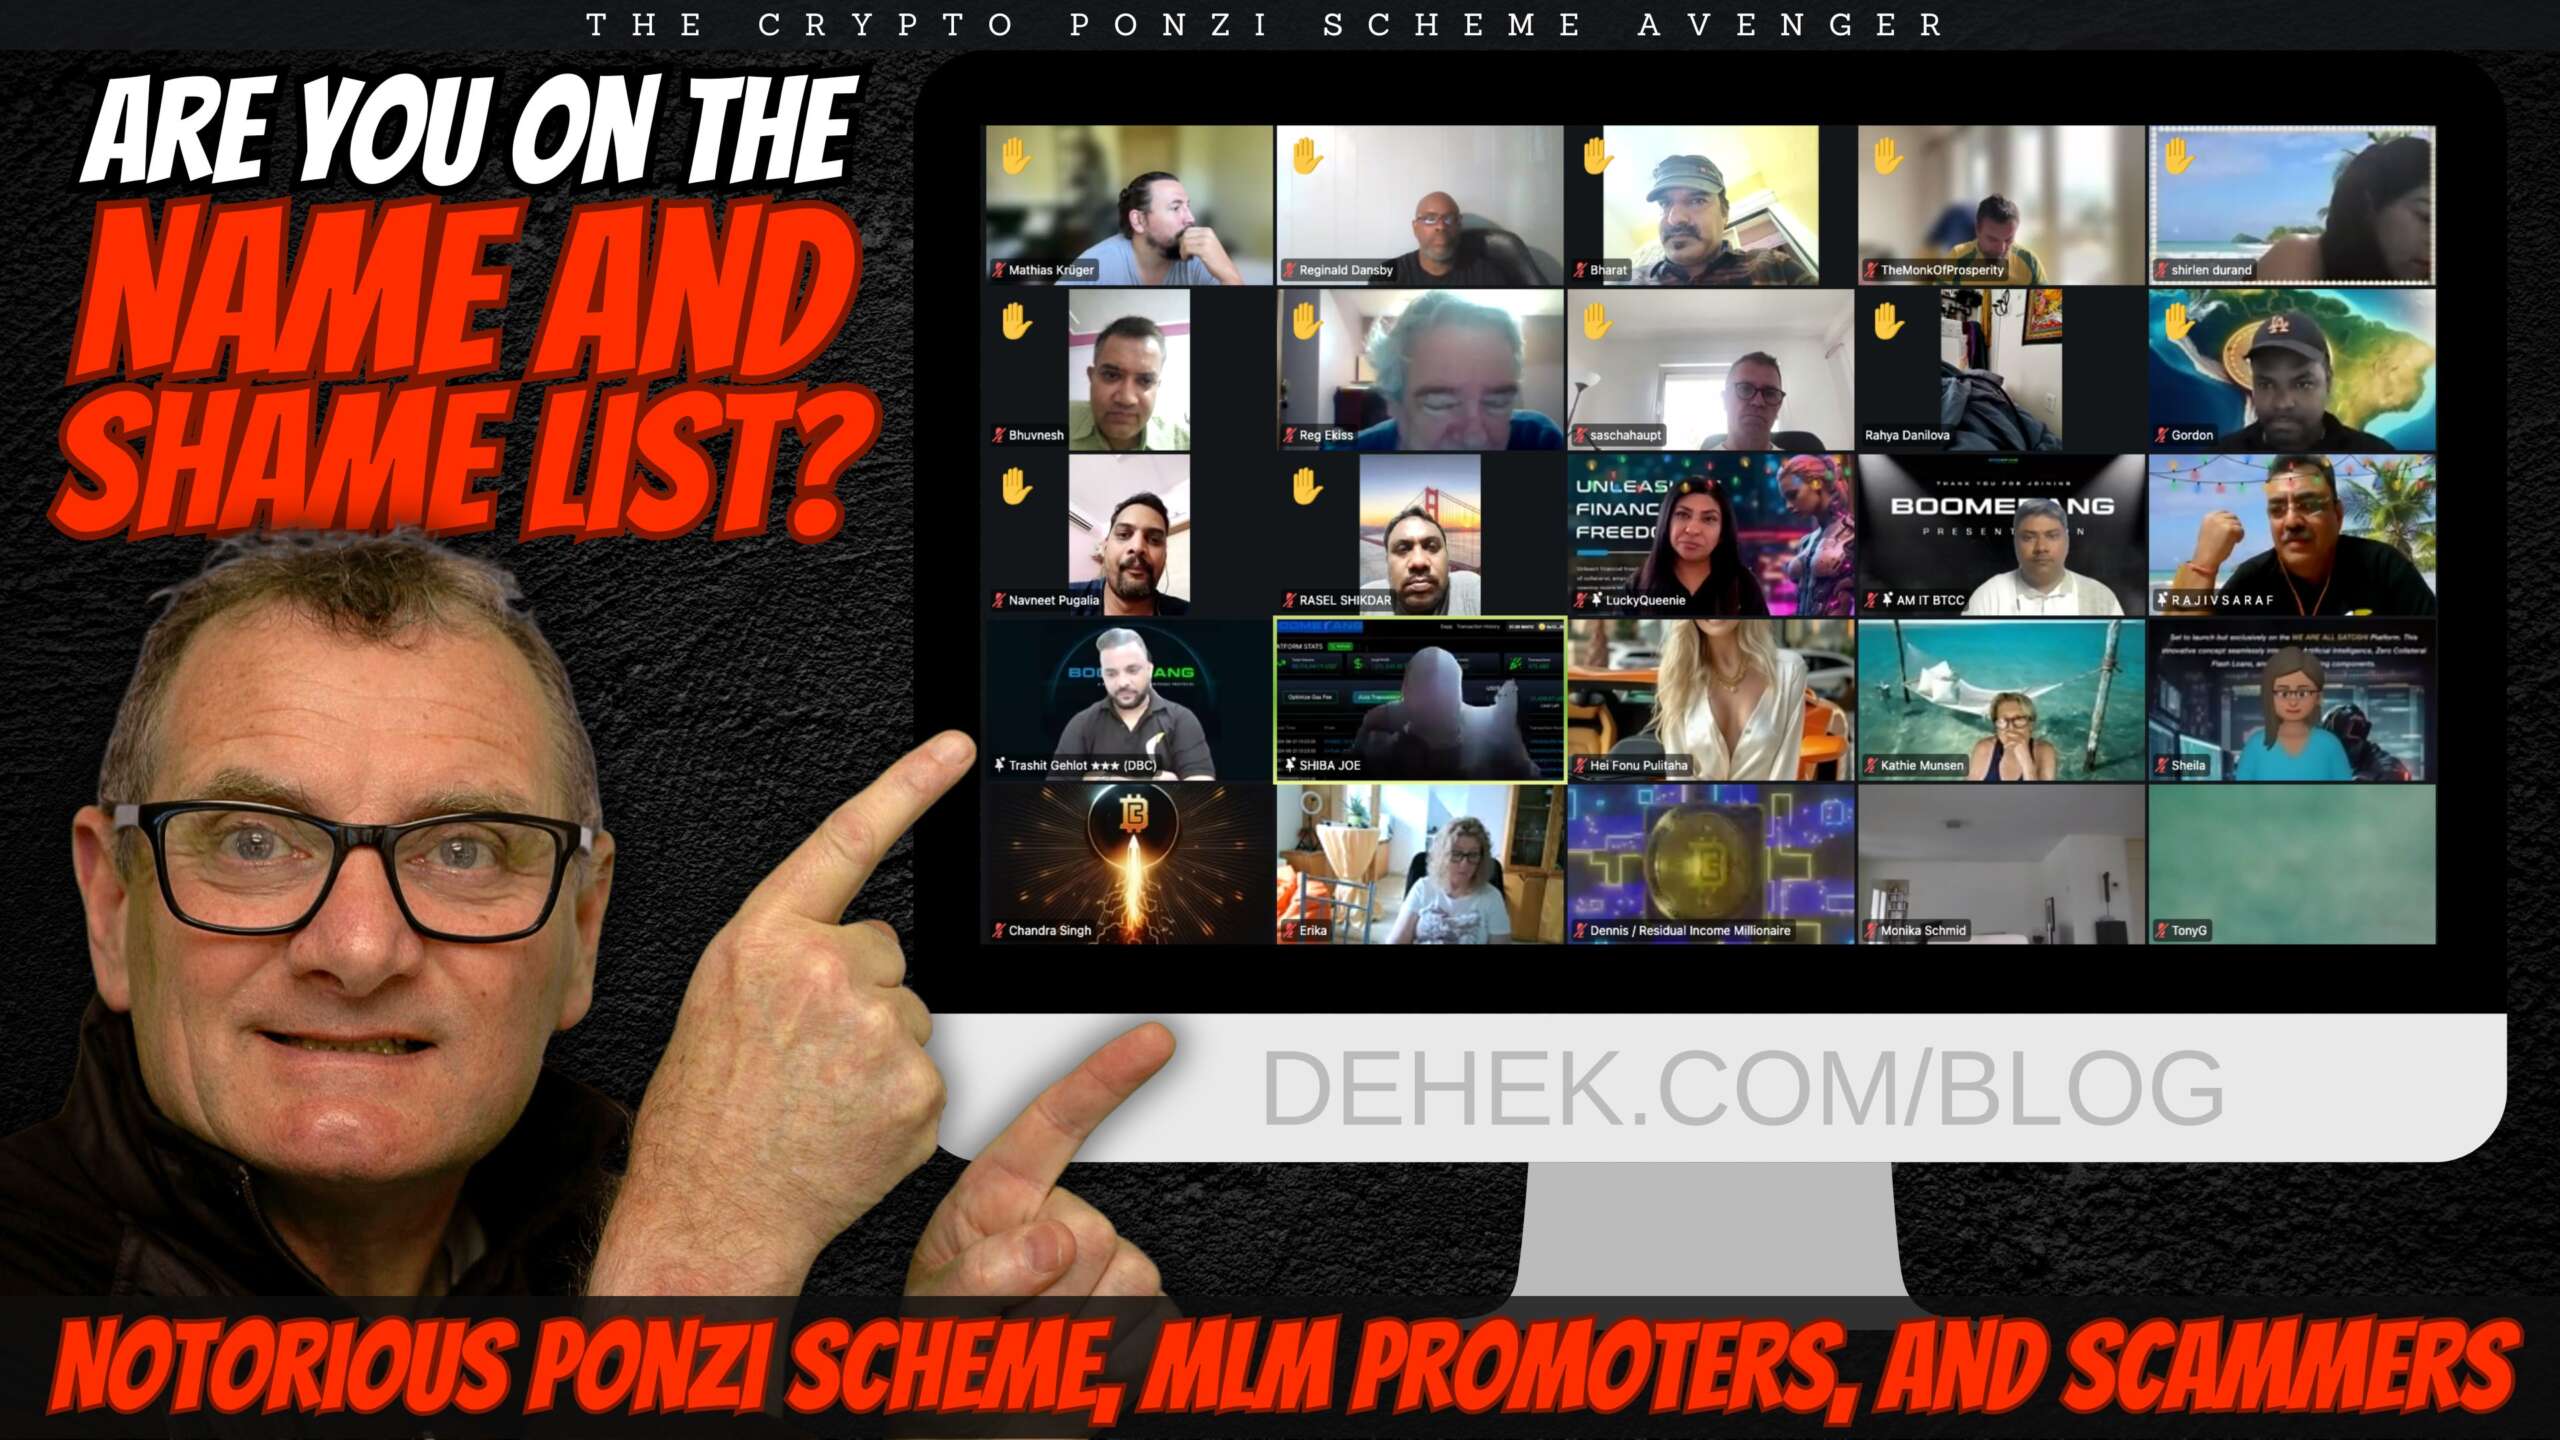 The Official Avenger Name and Shame List of Notorious Ponzi Scheme, MLM Promoters, and Scammers